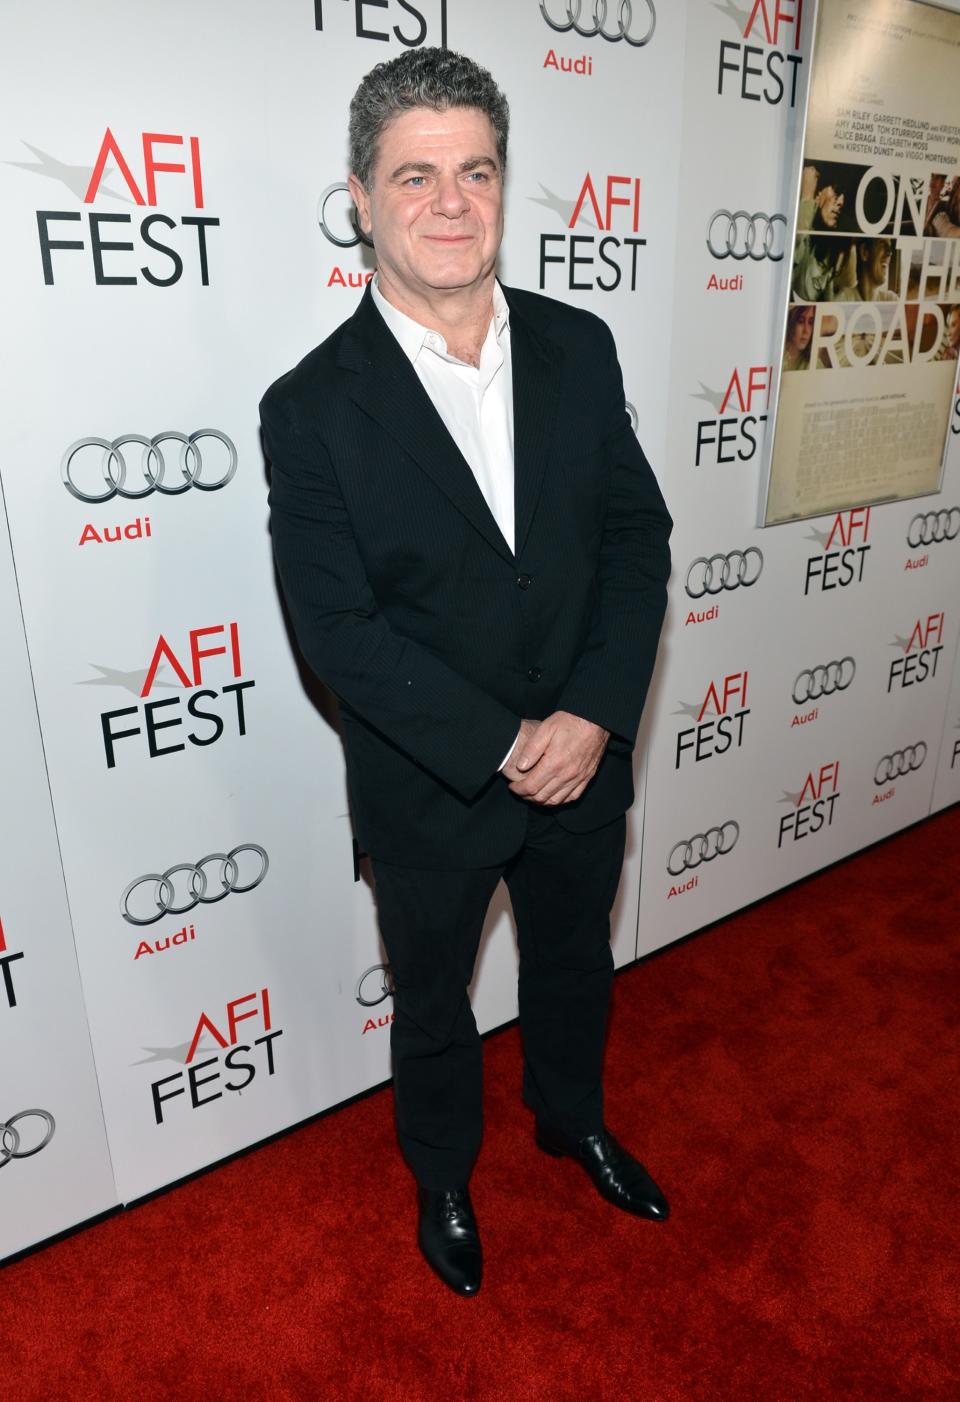 AFI FEST 2012 Presented By Audi - "On The Road" Premiere - Red Carpet